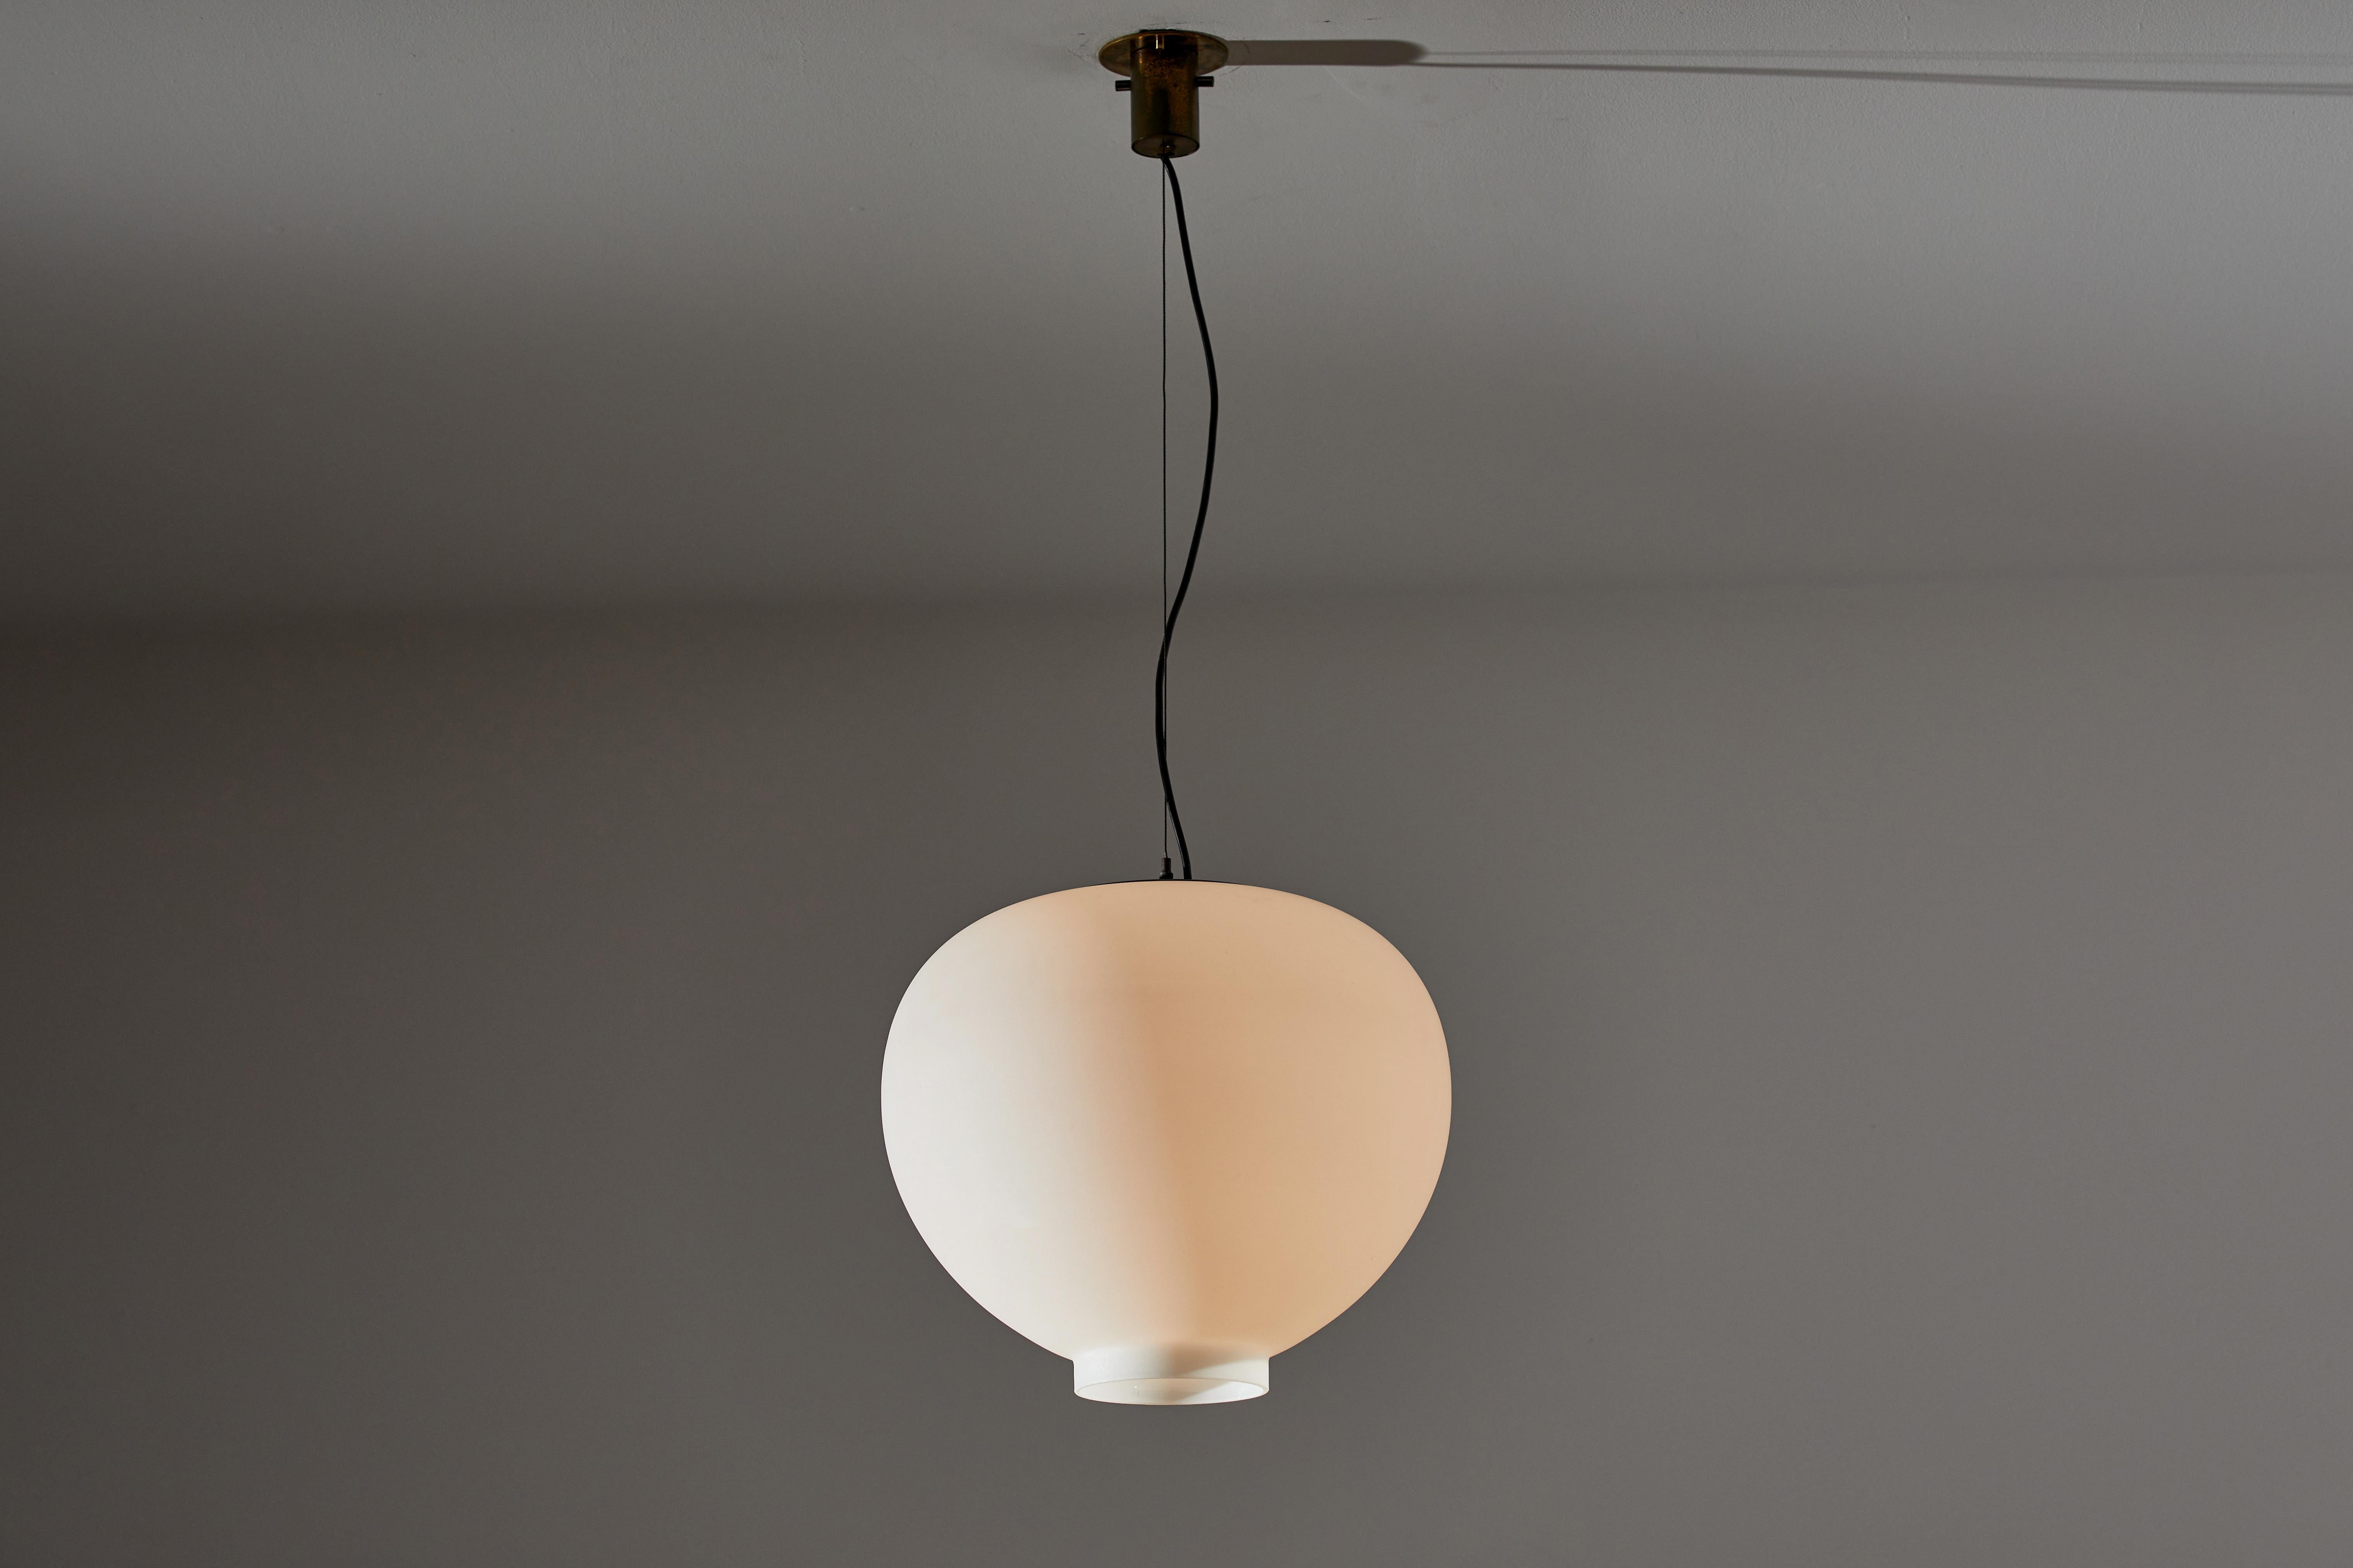 Suspension light by Stilnovo. Manufactured in Italy, circa 1950s. Brushed satin glass diffuser, brass hardware. Rewired for U.S. standards. Original canopy, custom brass ceiling plate. Takes one E26 100w maximum bulb. Bulb provided as a one time